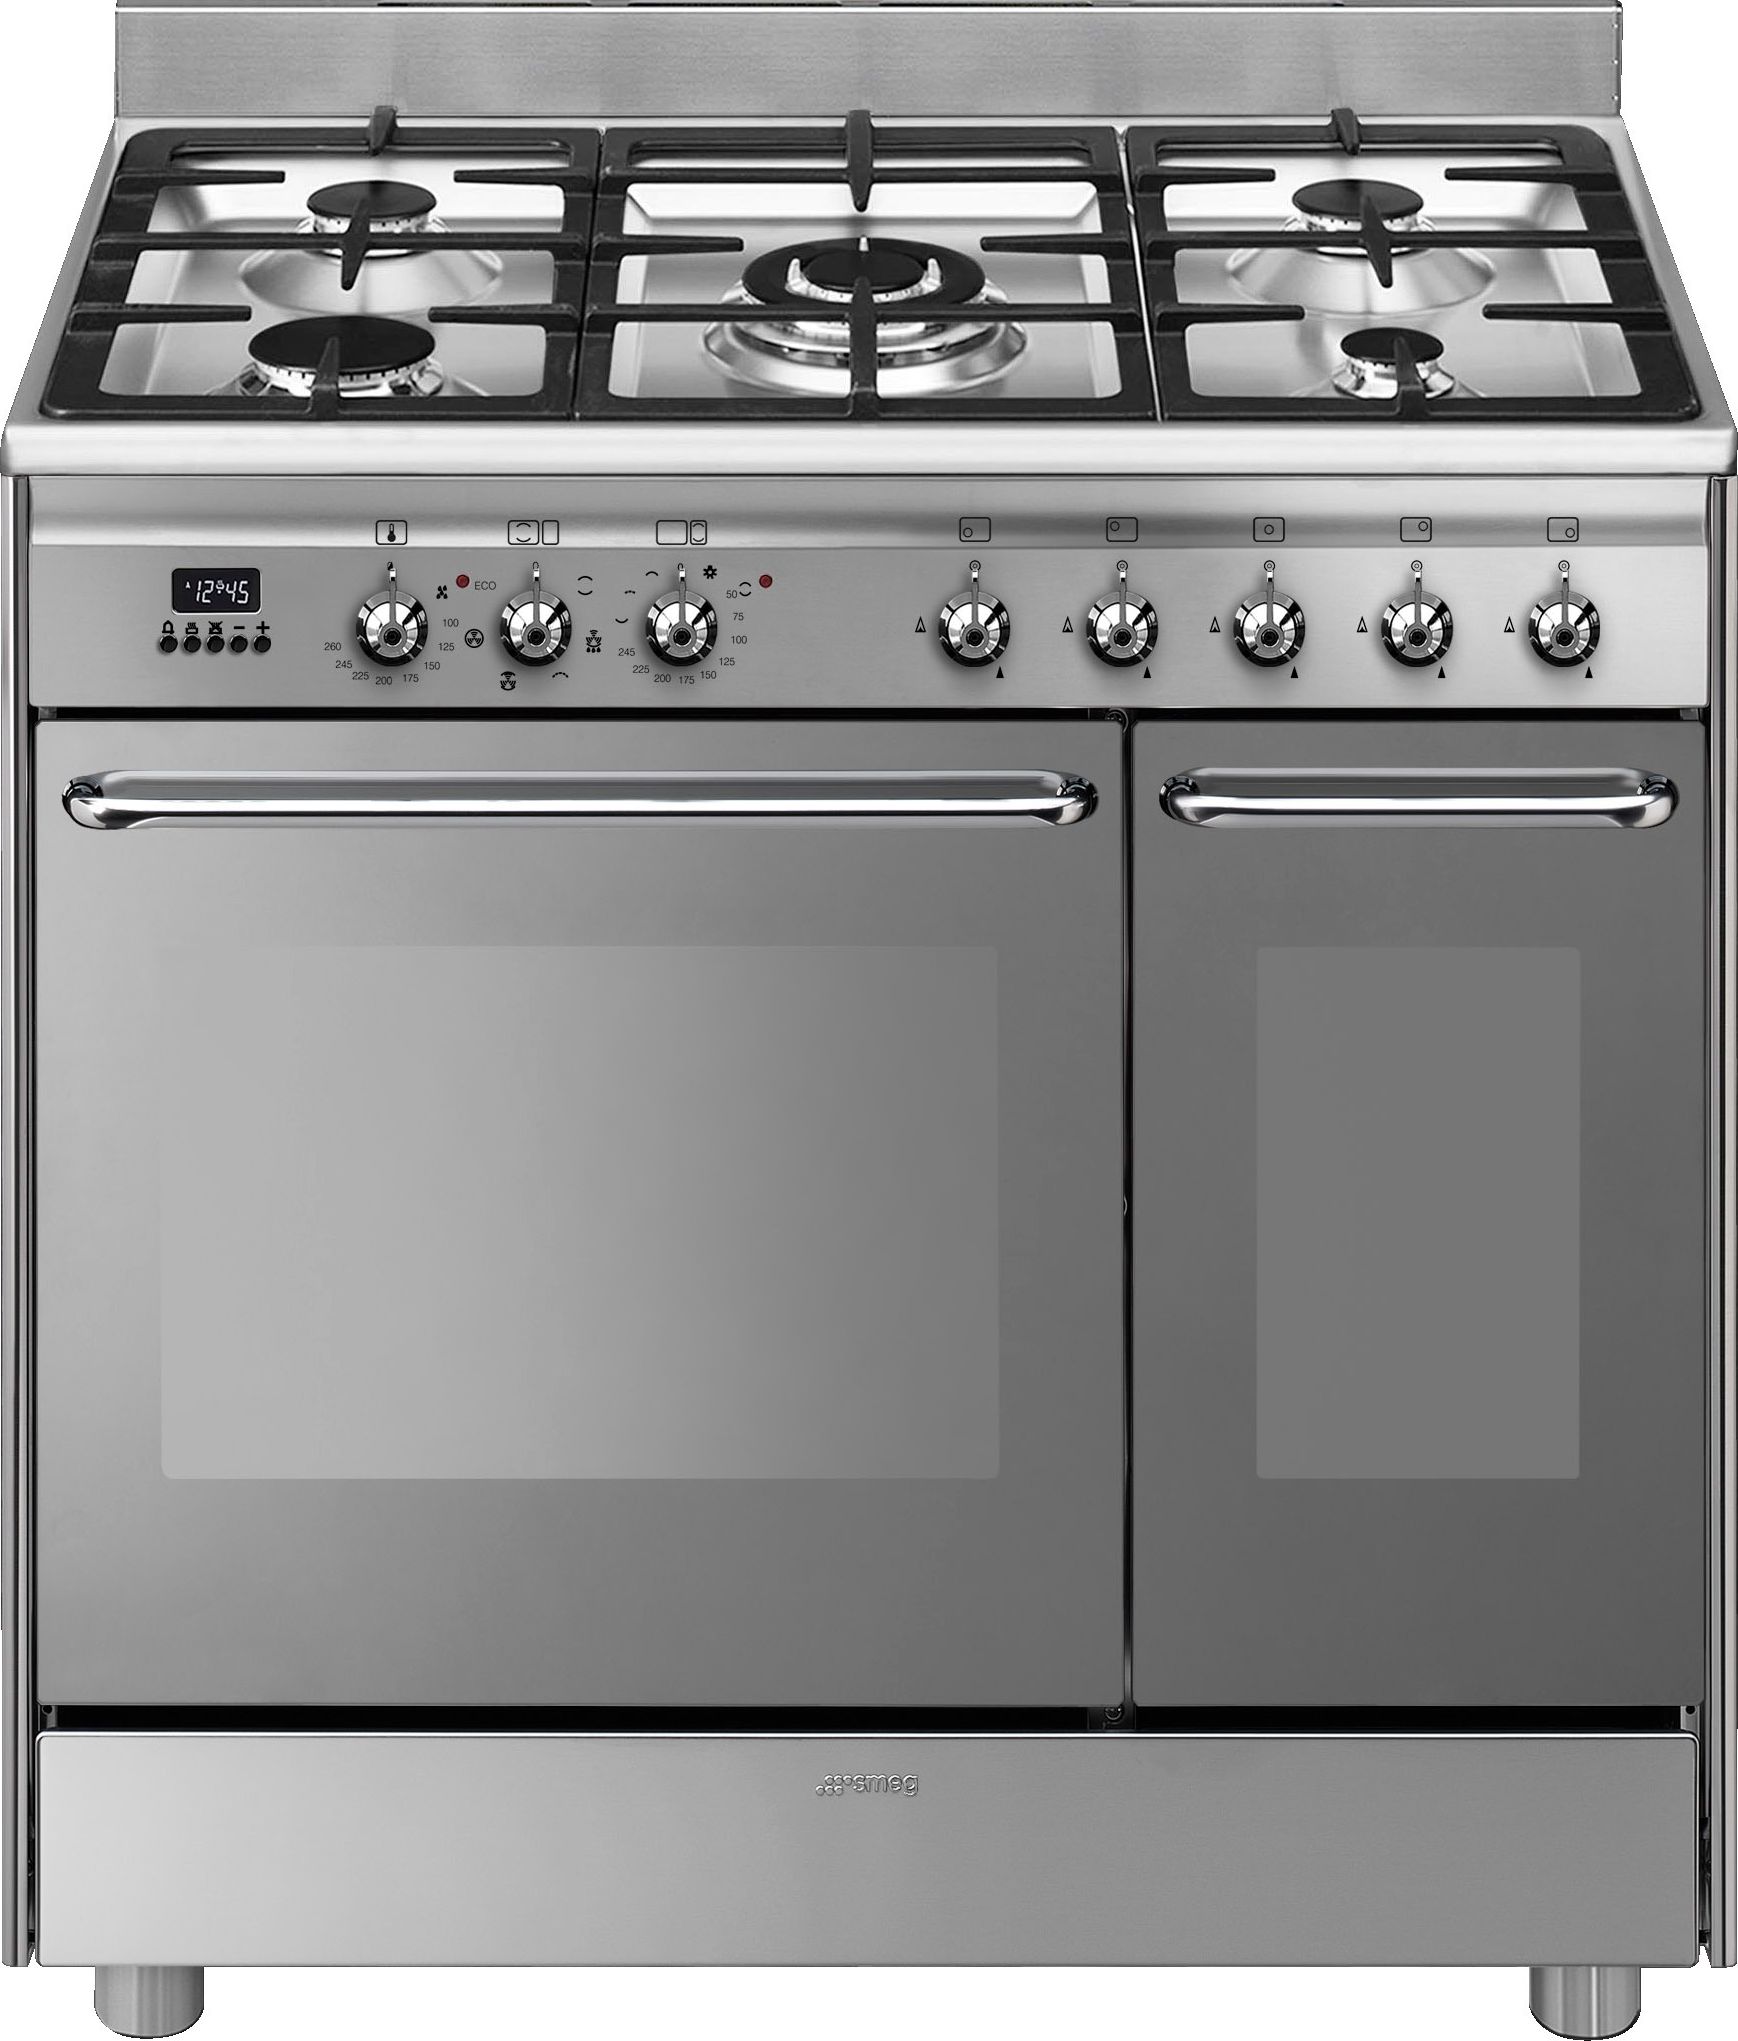 Smeg Concert CG92X9 90cm Dual Fuel Range Cooker - Stainless Steel - A/A Rated, Stainless Steel